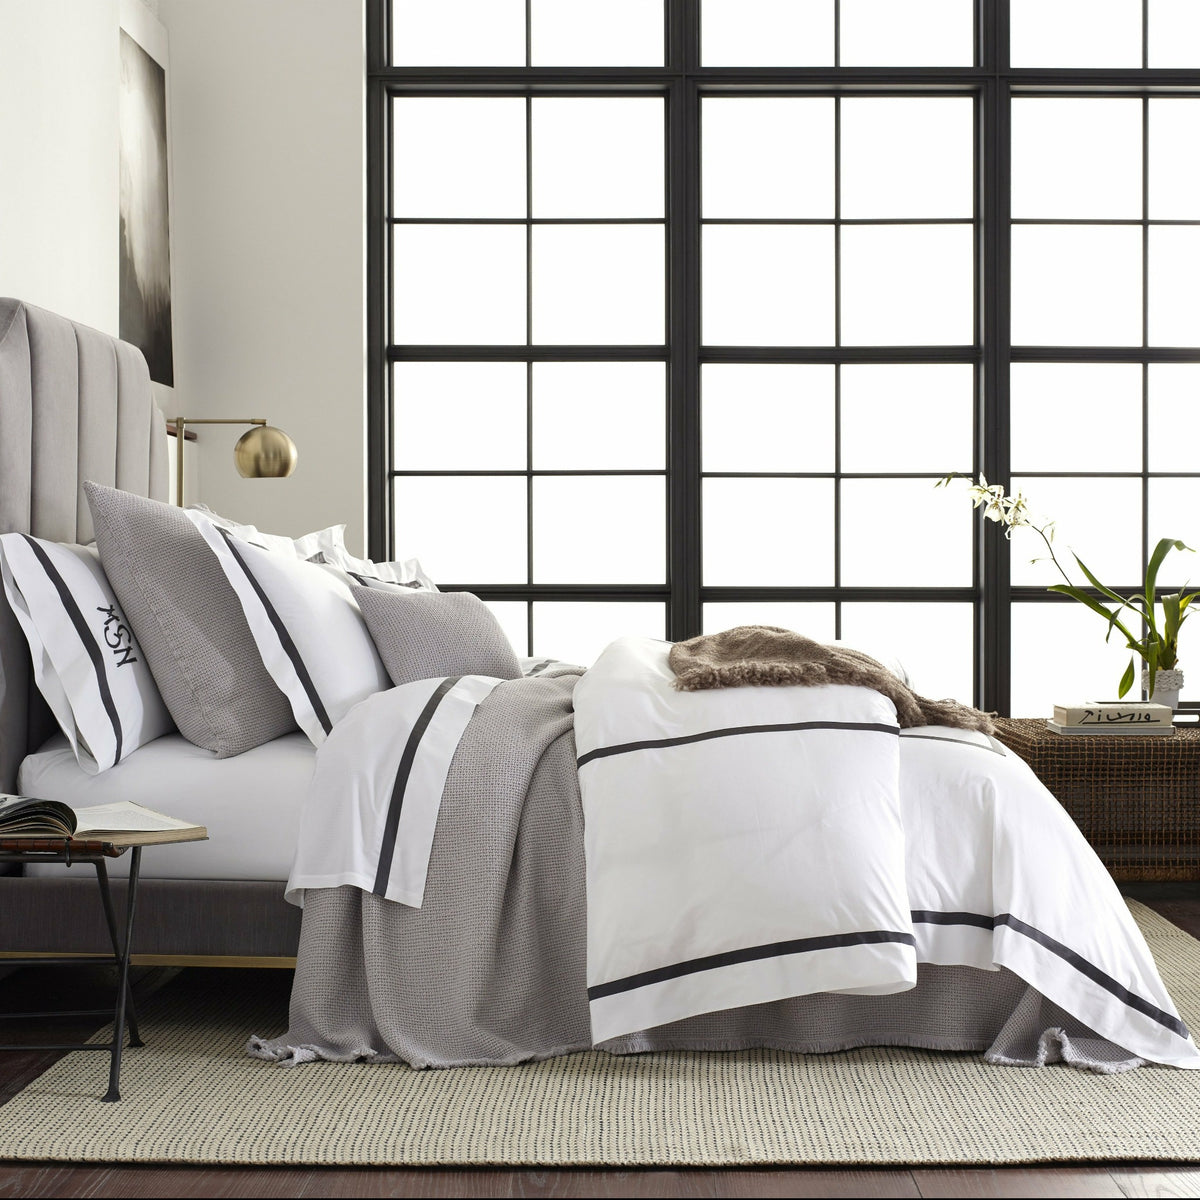 Matouk Lowell Bedding Collection With Selah Fine Linens